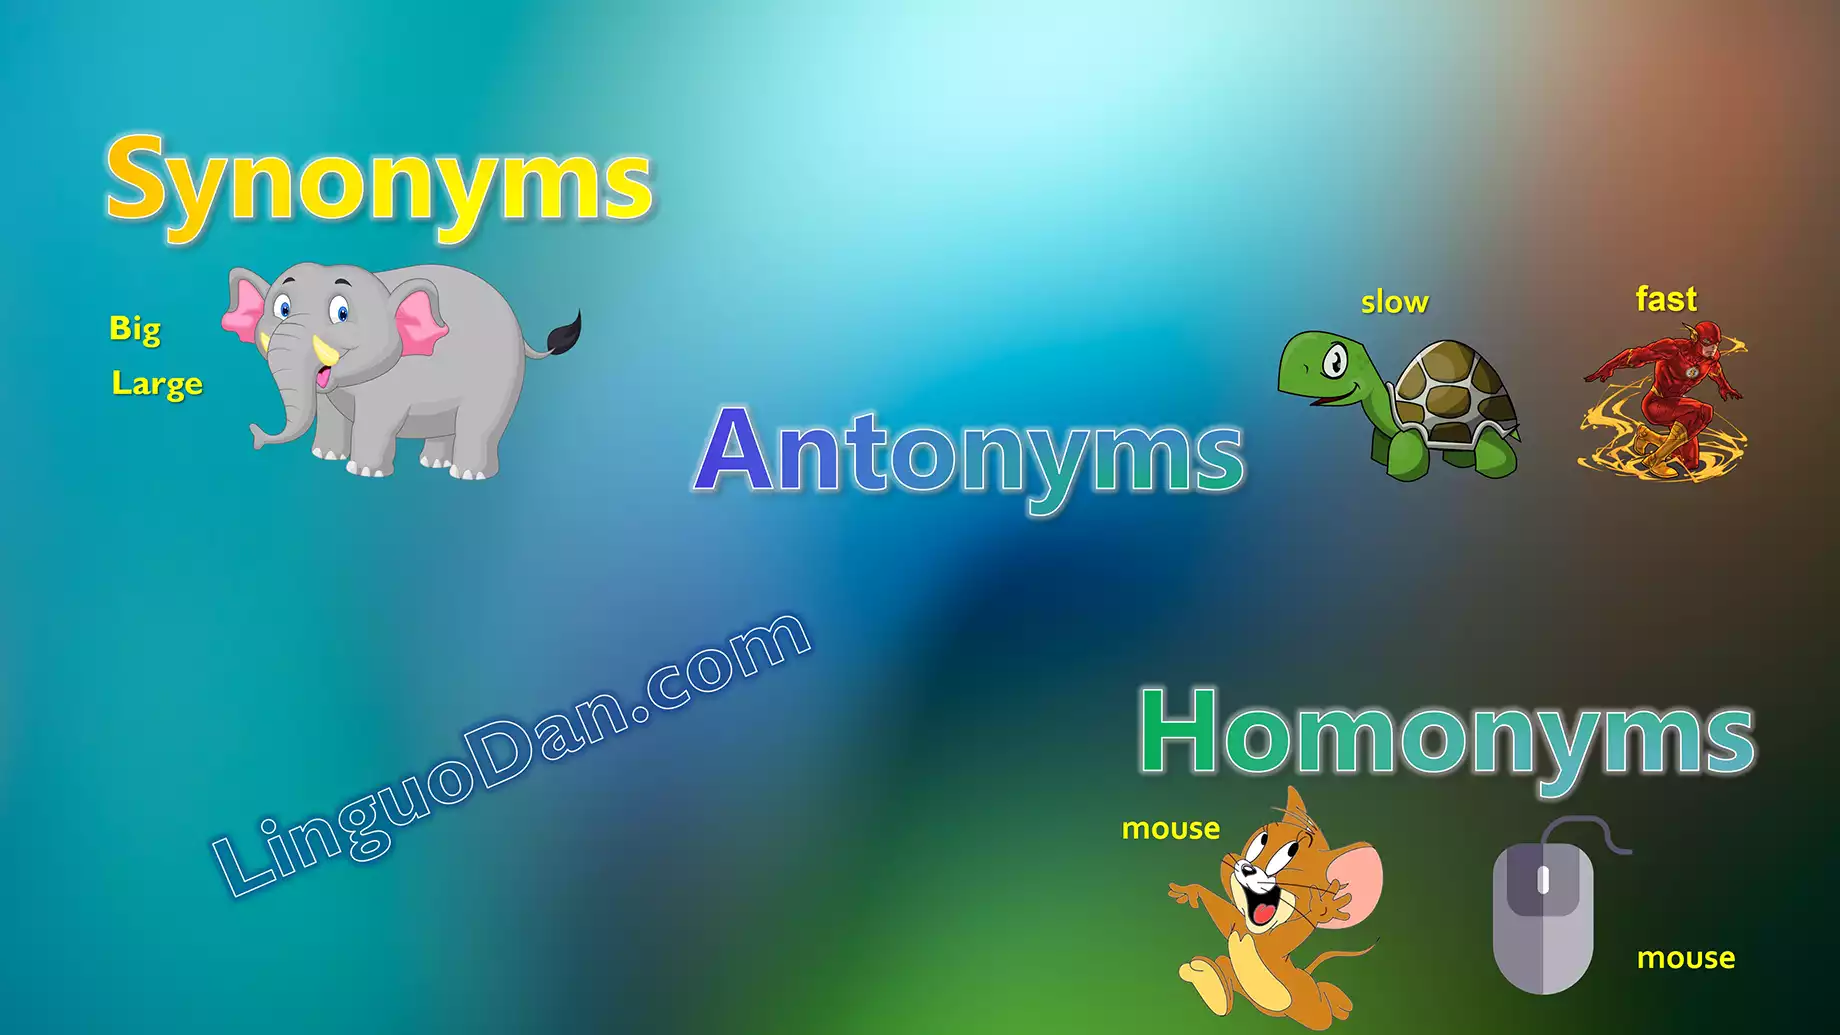 Synonyms and Antonyms to Enrich Vocabulary